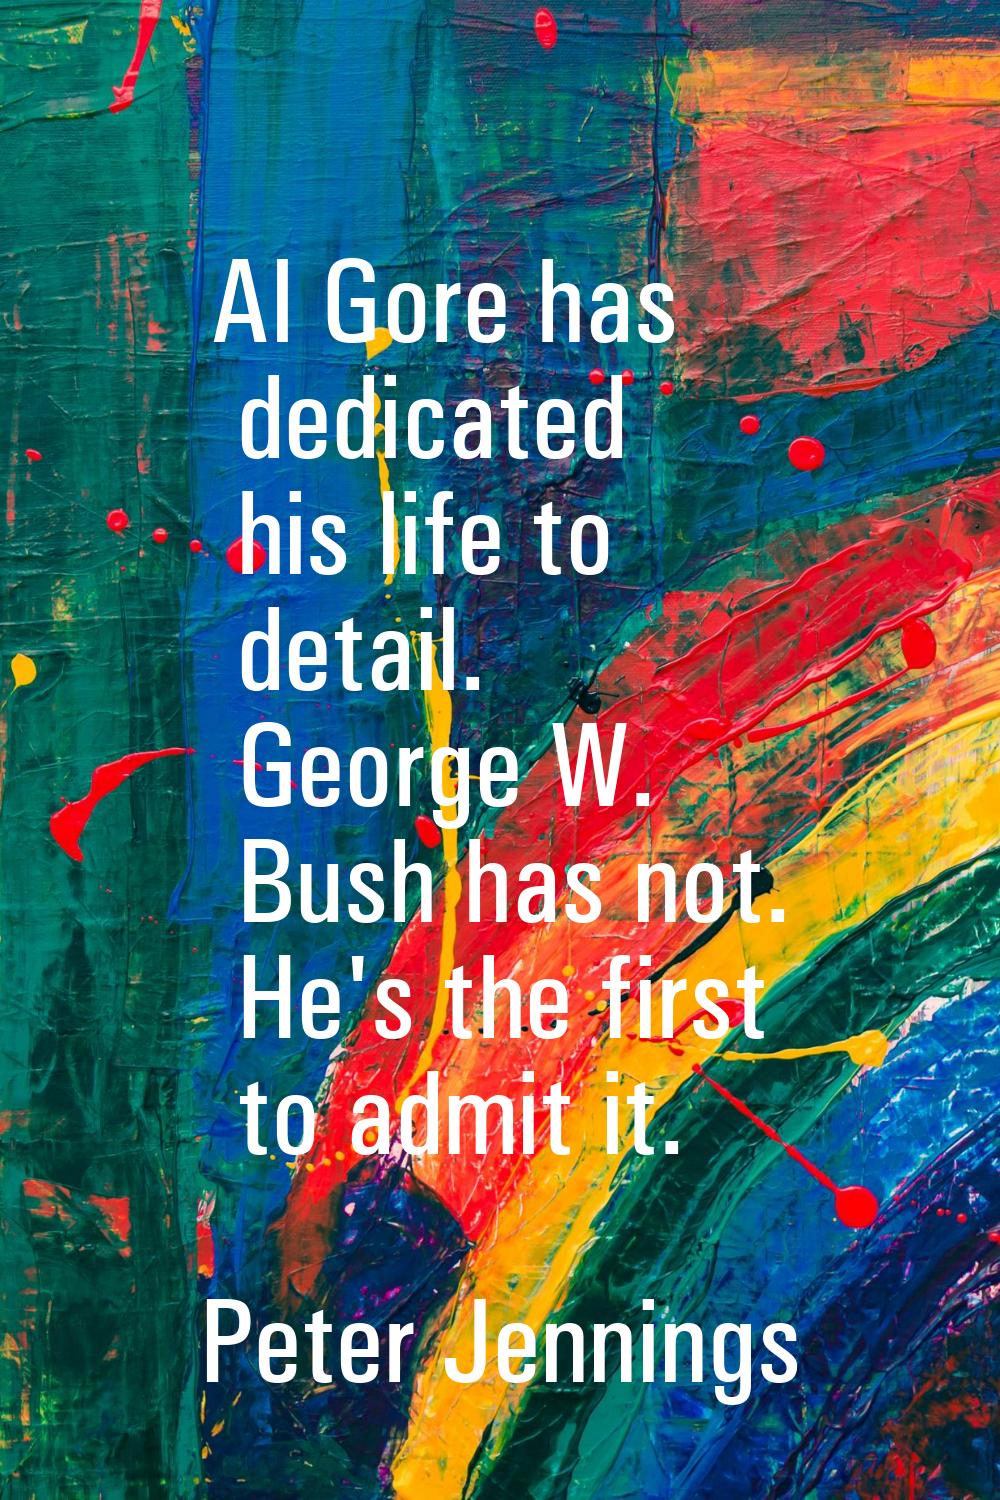 Al Gore has dedicated his life to detail. George W. Bush has not. He's the first to admit it.